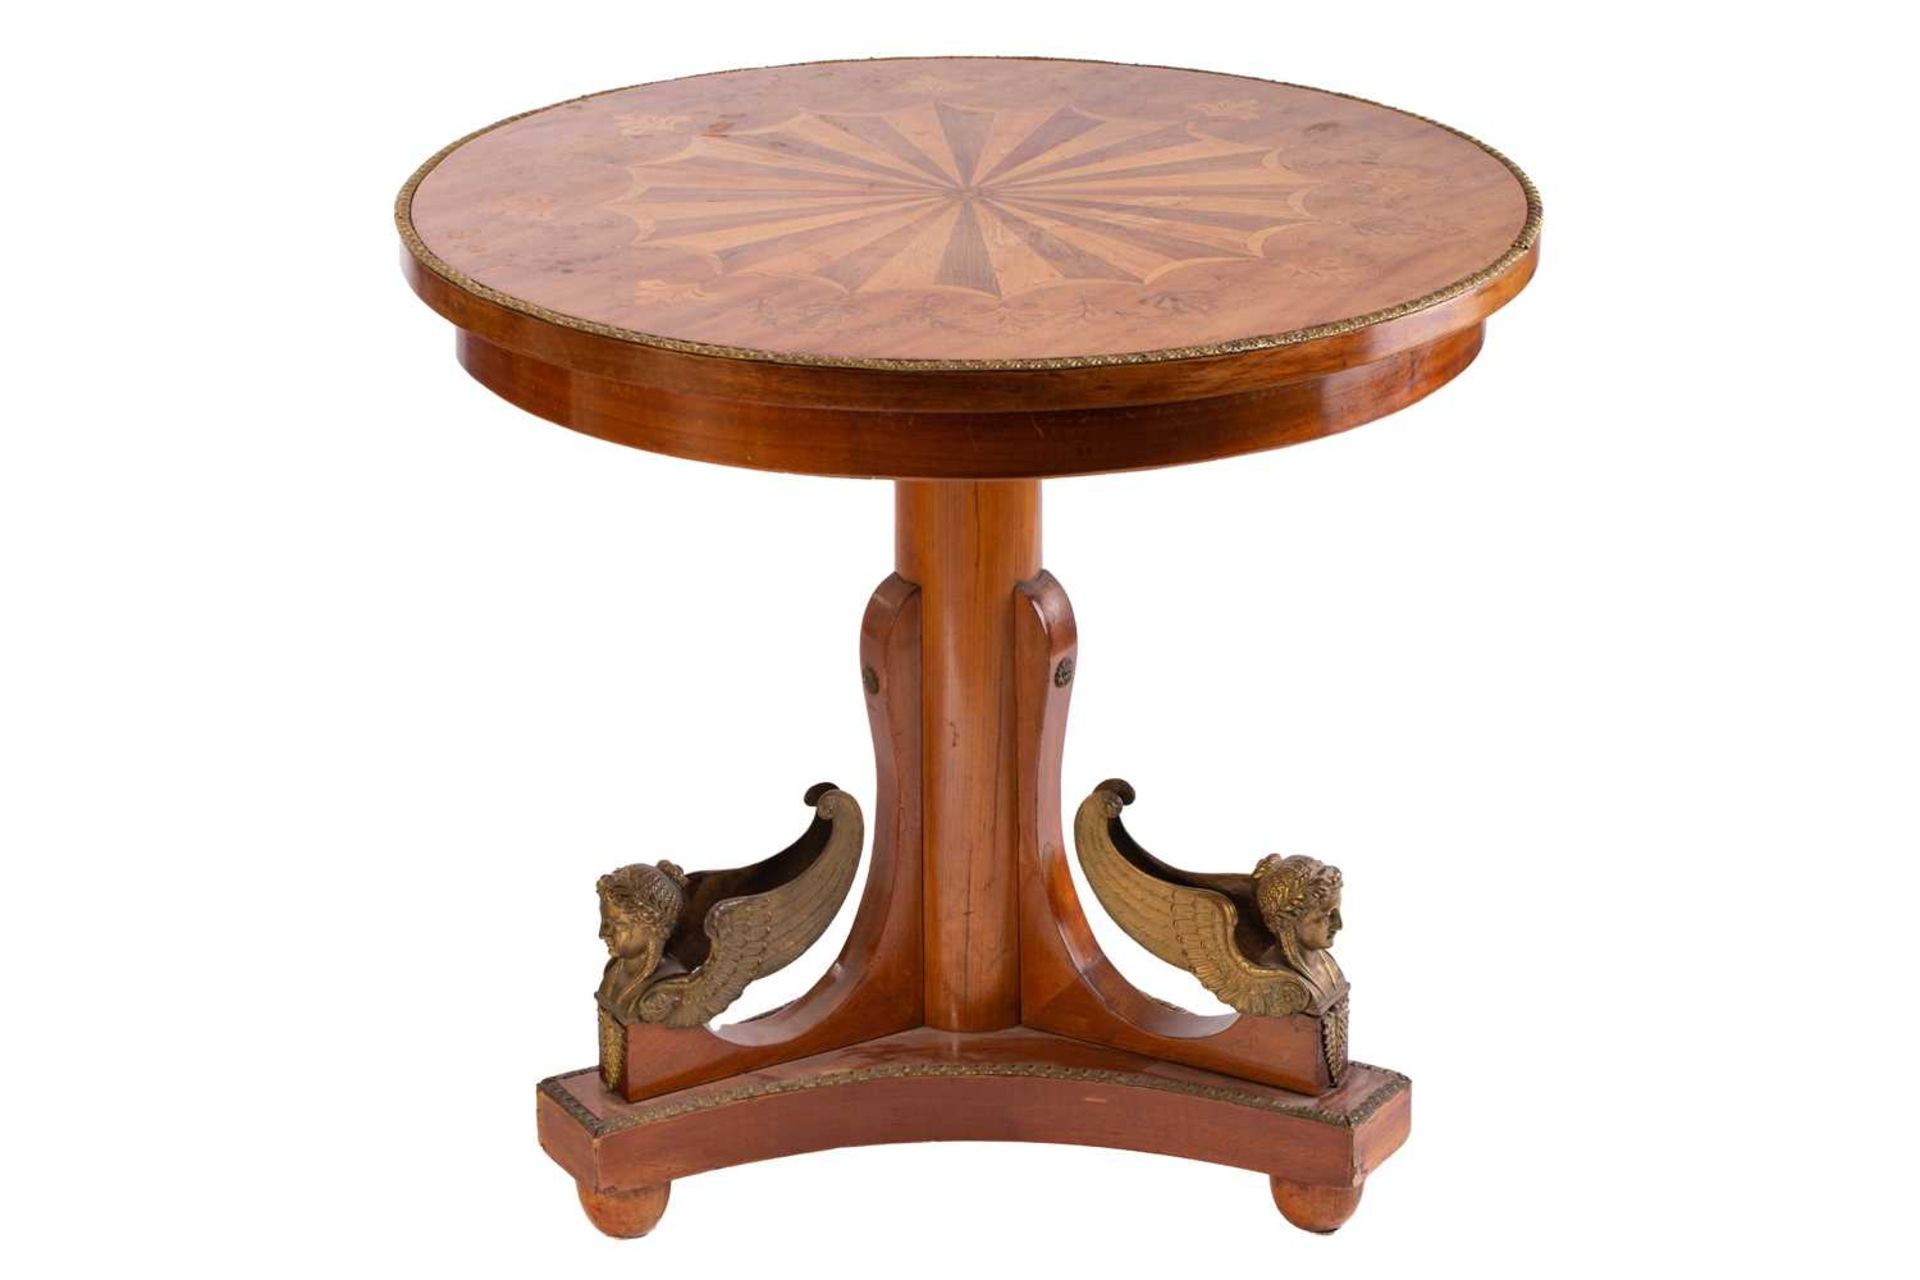 A French Charles X style mahogany gueridon, late 19th century, the circular top with a decorative